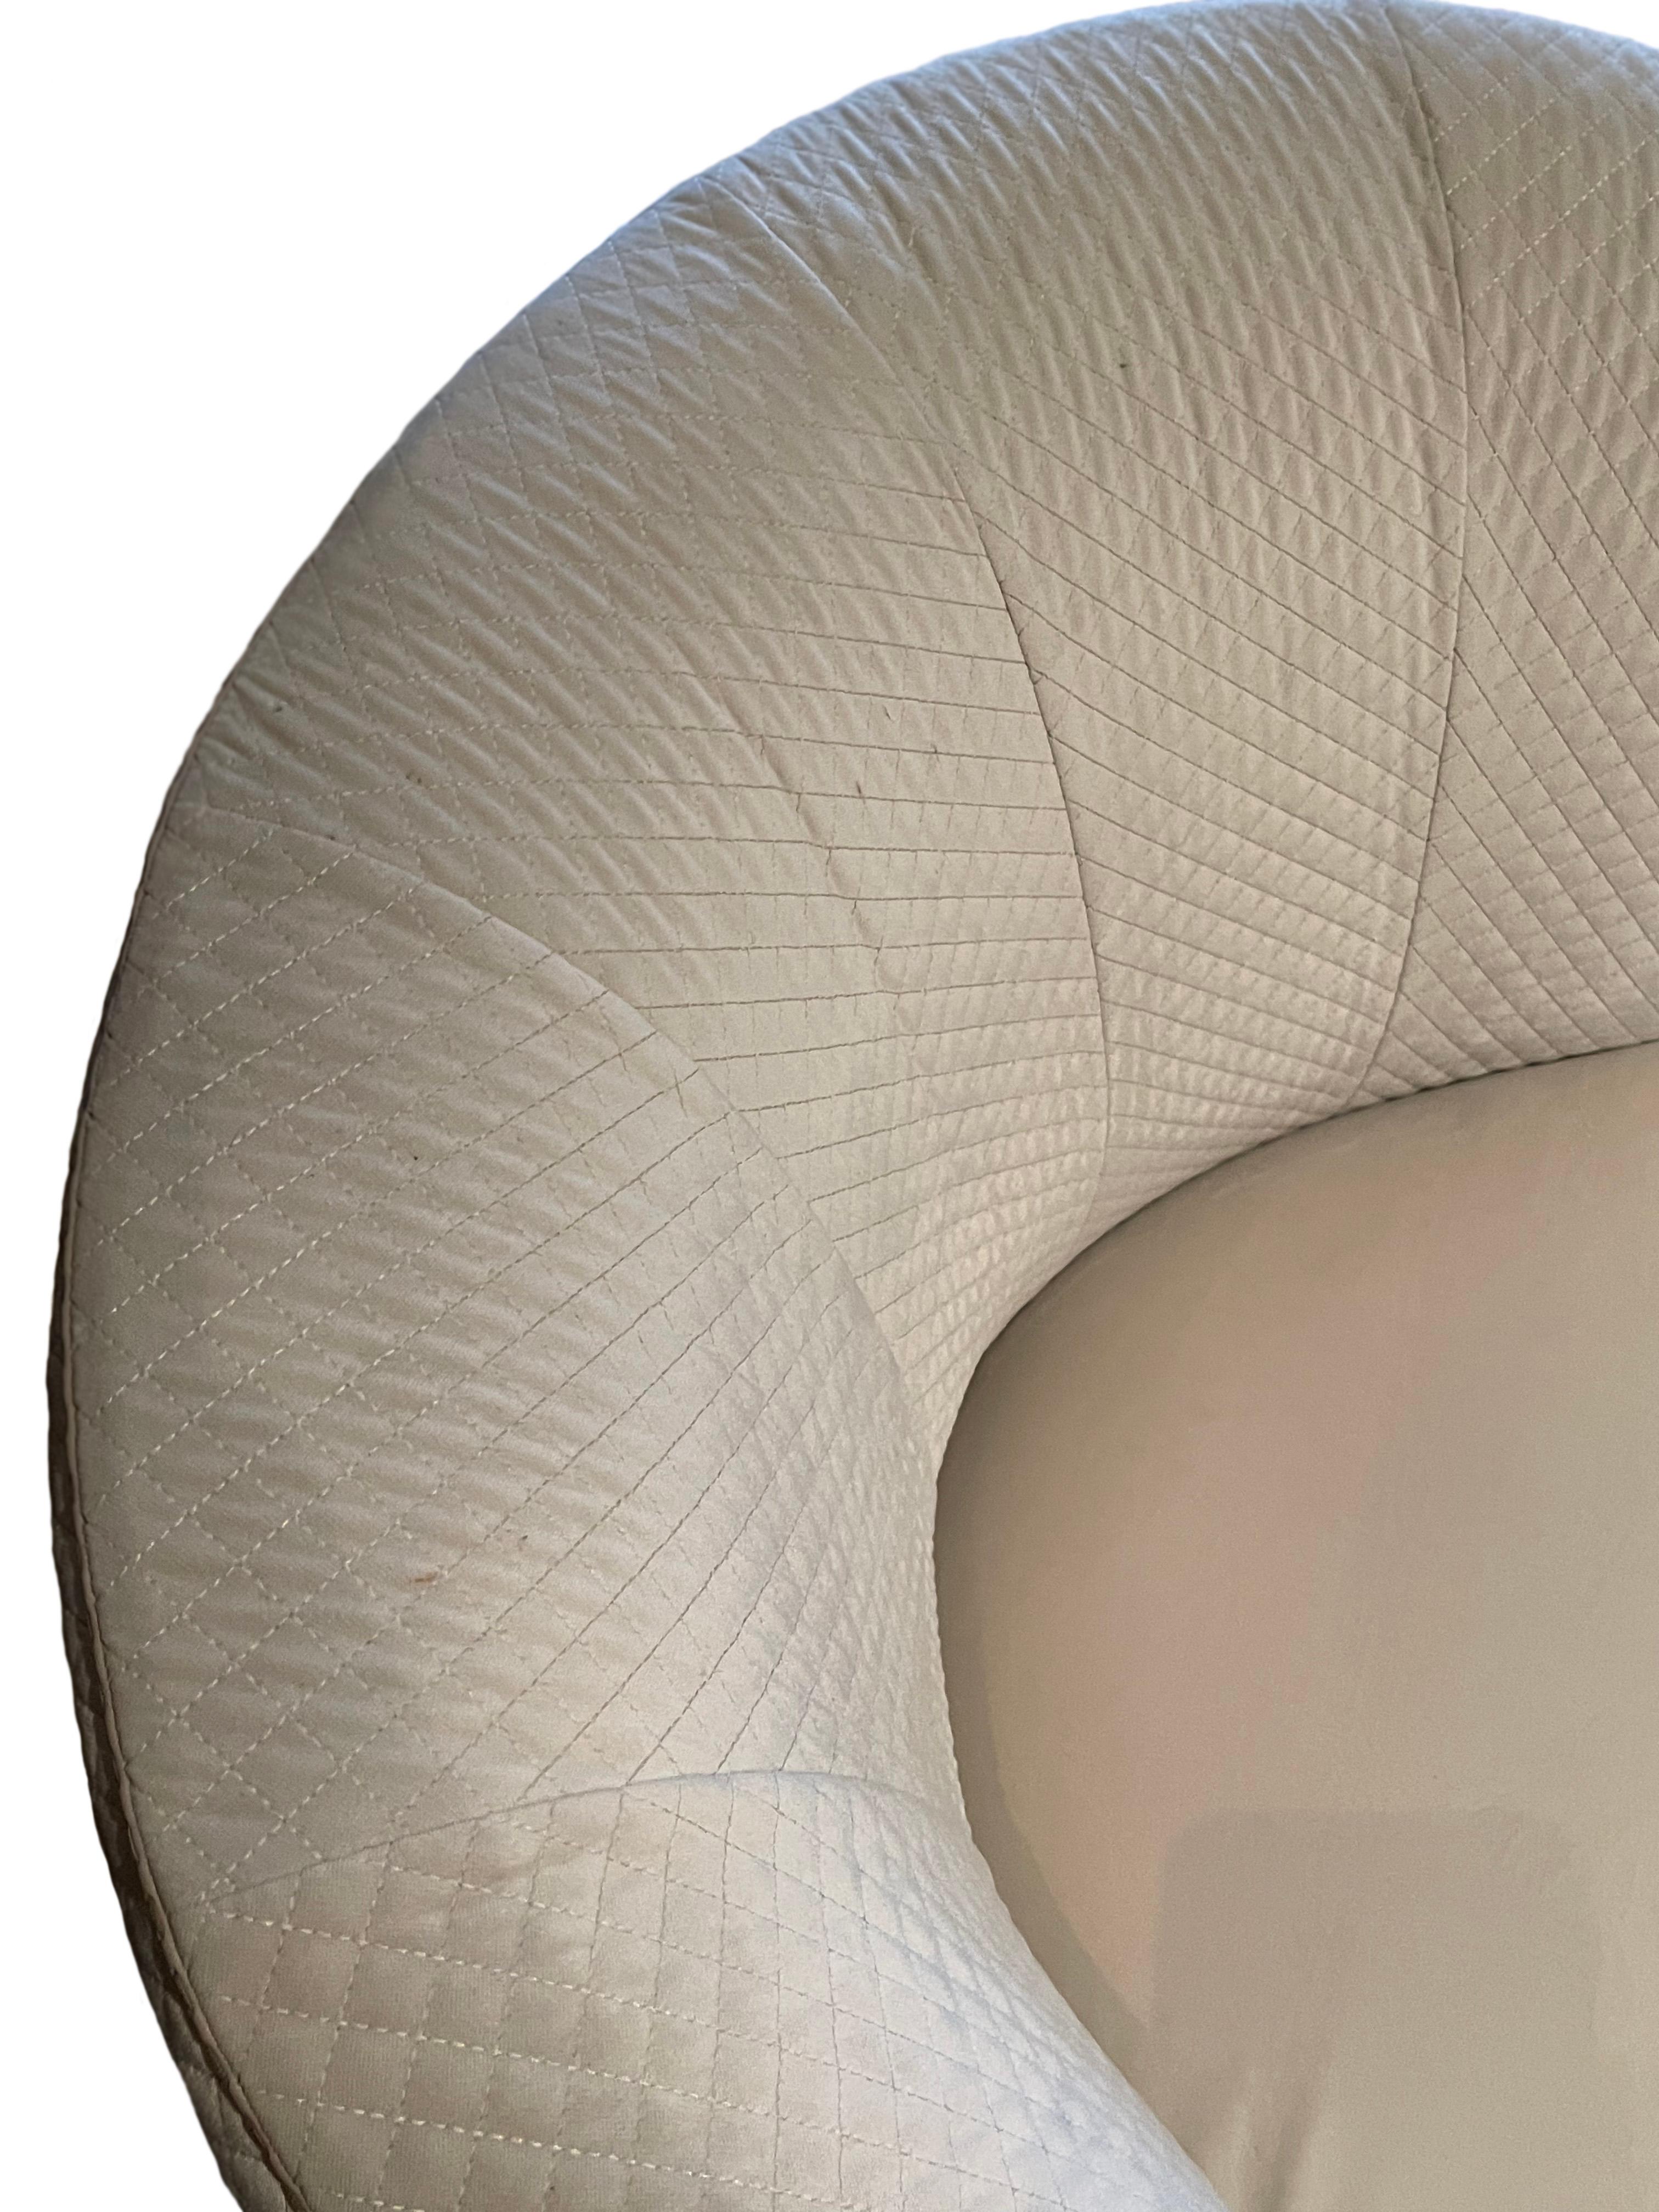 Modern Pair of Swivel Chairs in Cream Velvet Quilted Upholstery by Fendi Casa, Italy 